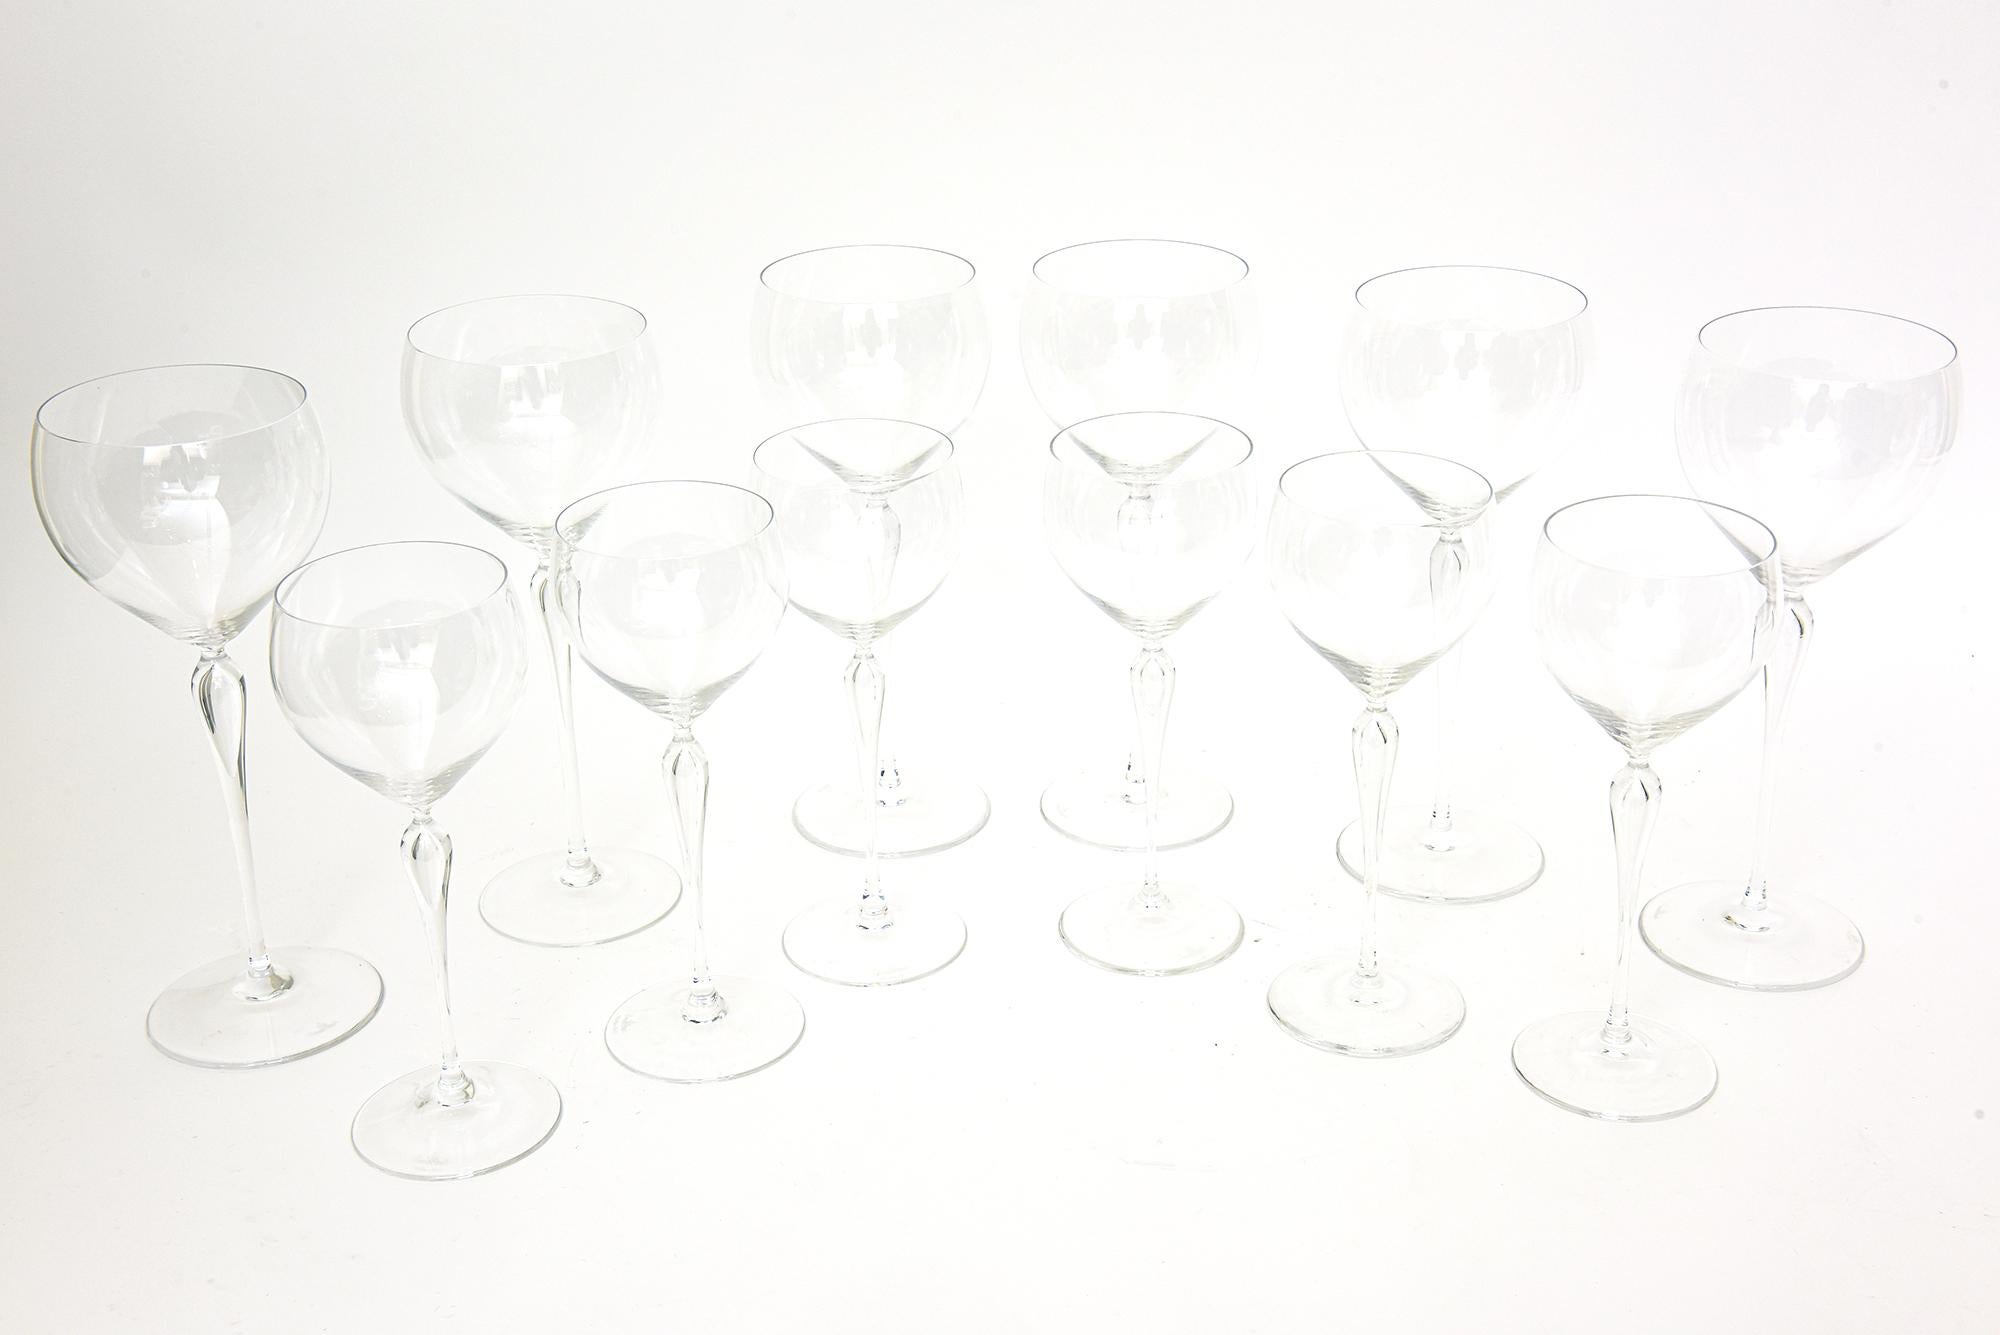 This elegant, modernist and vintage Rosenthal set of 24 hand blown lead crystal white wine and red wine glasses are made in Germany and from the 80's. It is called the Maitre pattern and rings with simplicity, refinement and modern attributes. It is